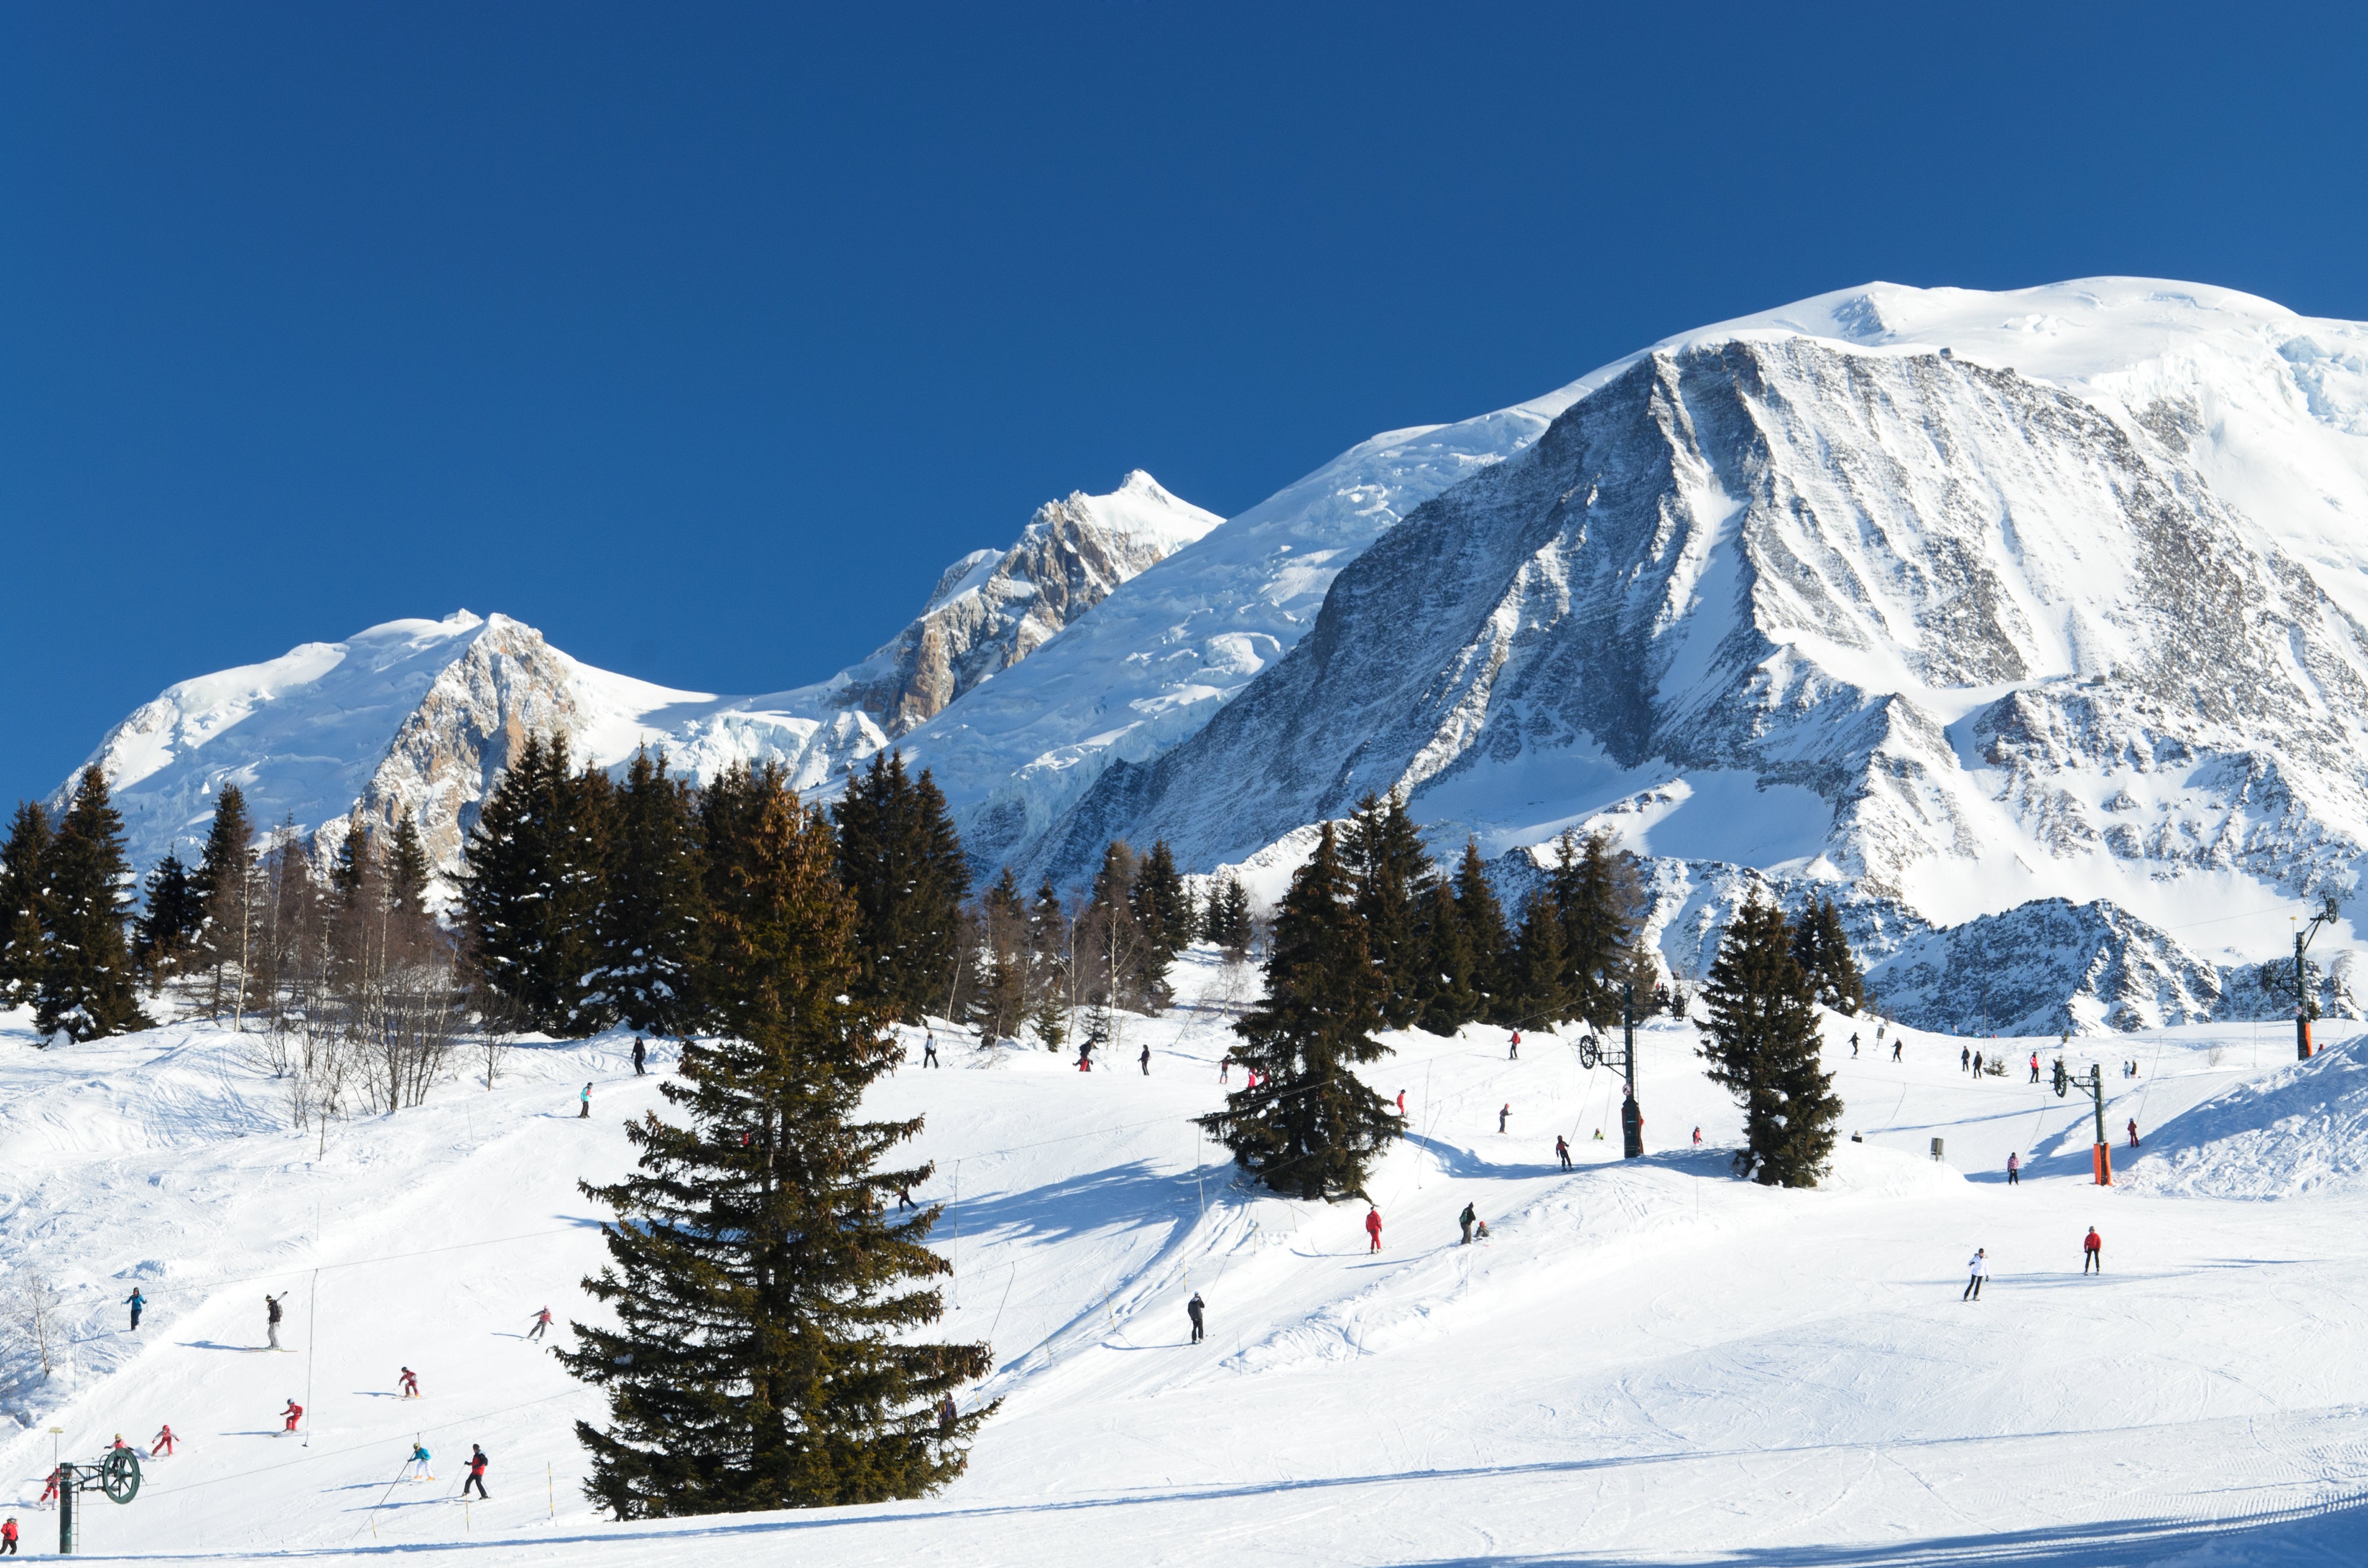 Chamonix is a snow-capped delight for quiet exploration come March